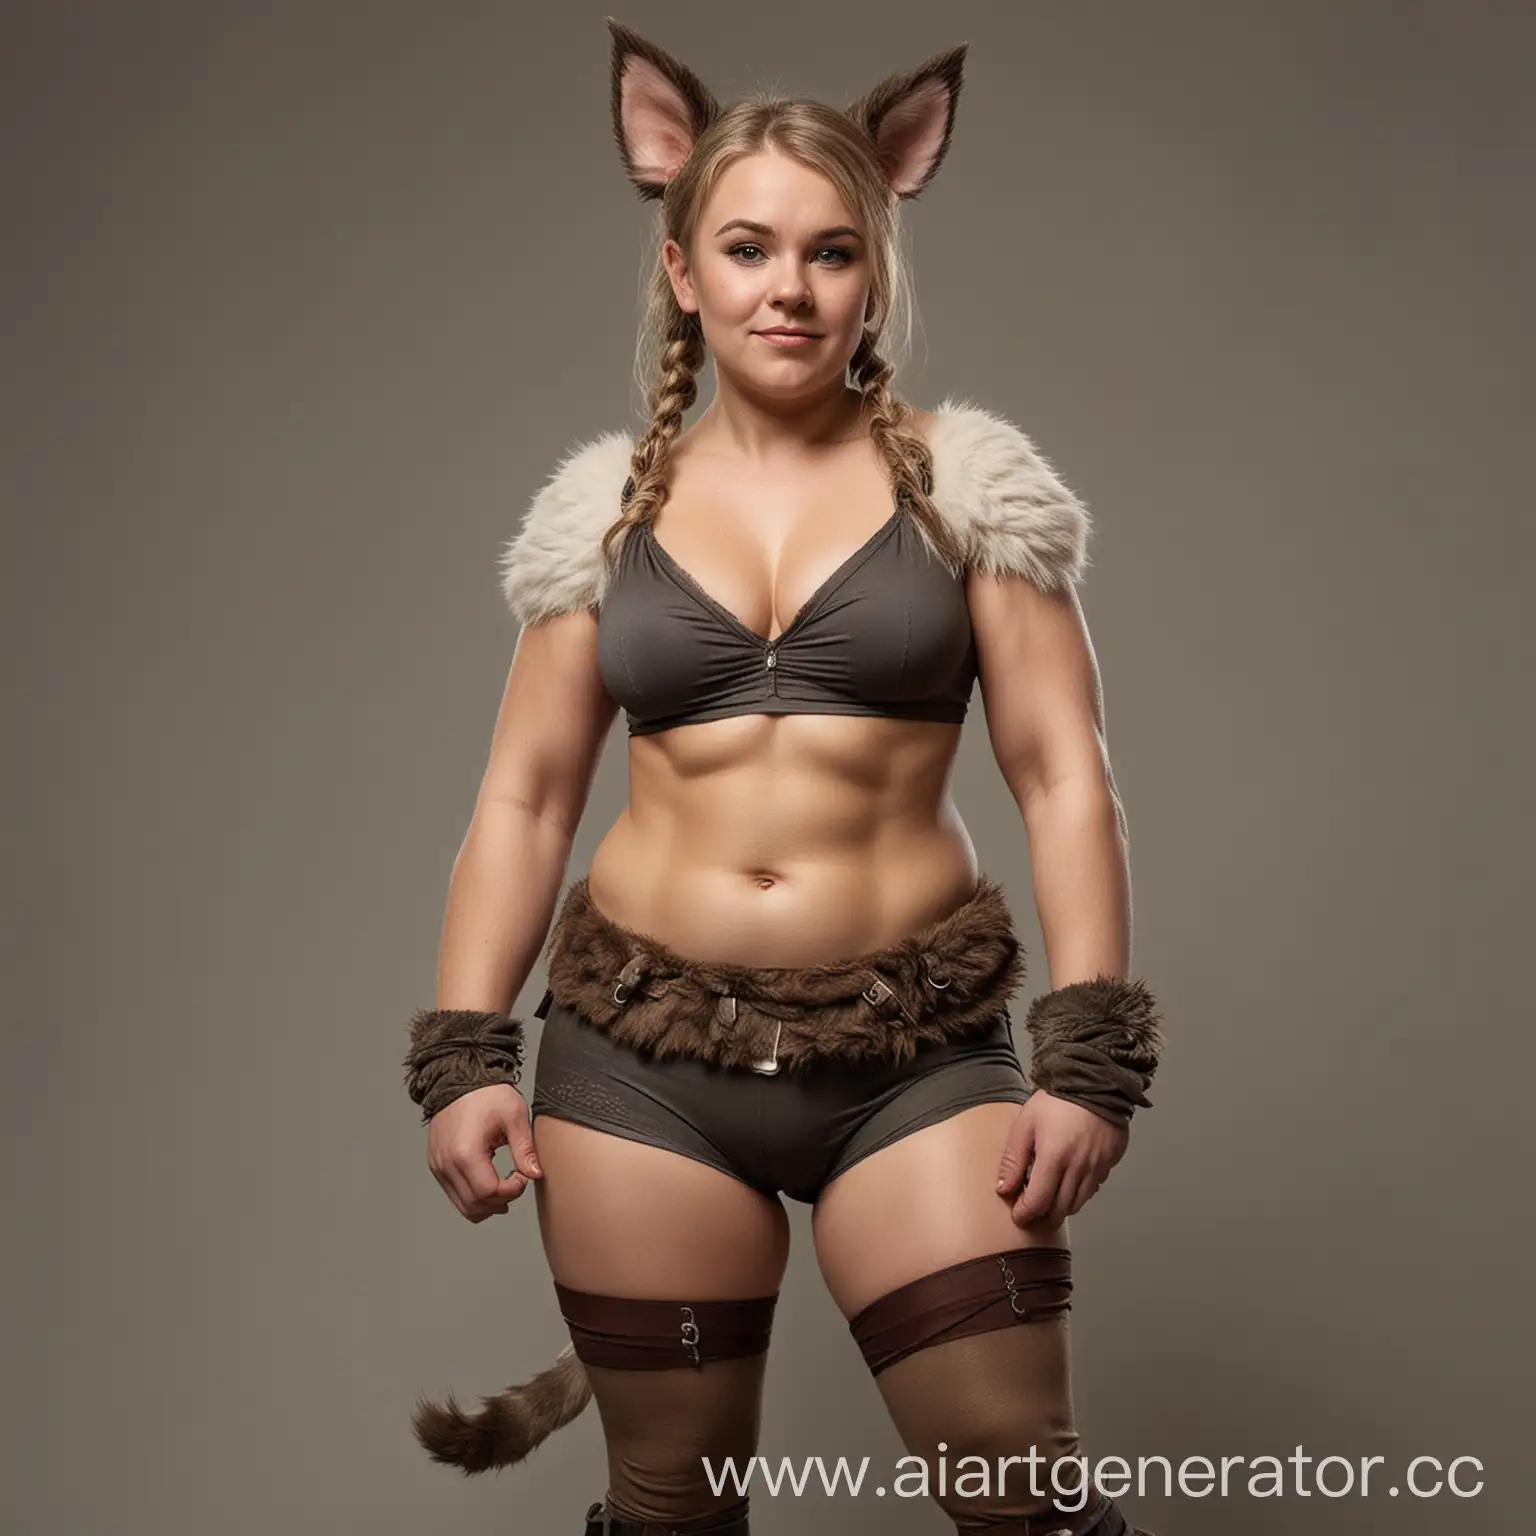 Colorful-Buff-Dwarf-Wearing-Drab-Chestplate-and-Cat-Ears-in-Tights